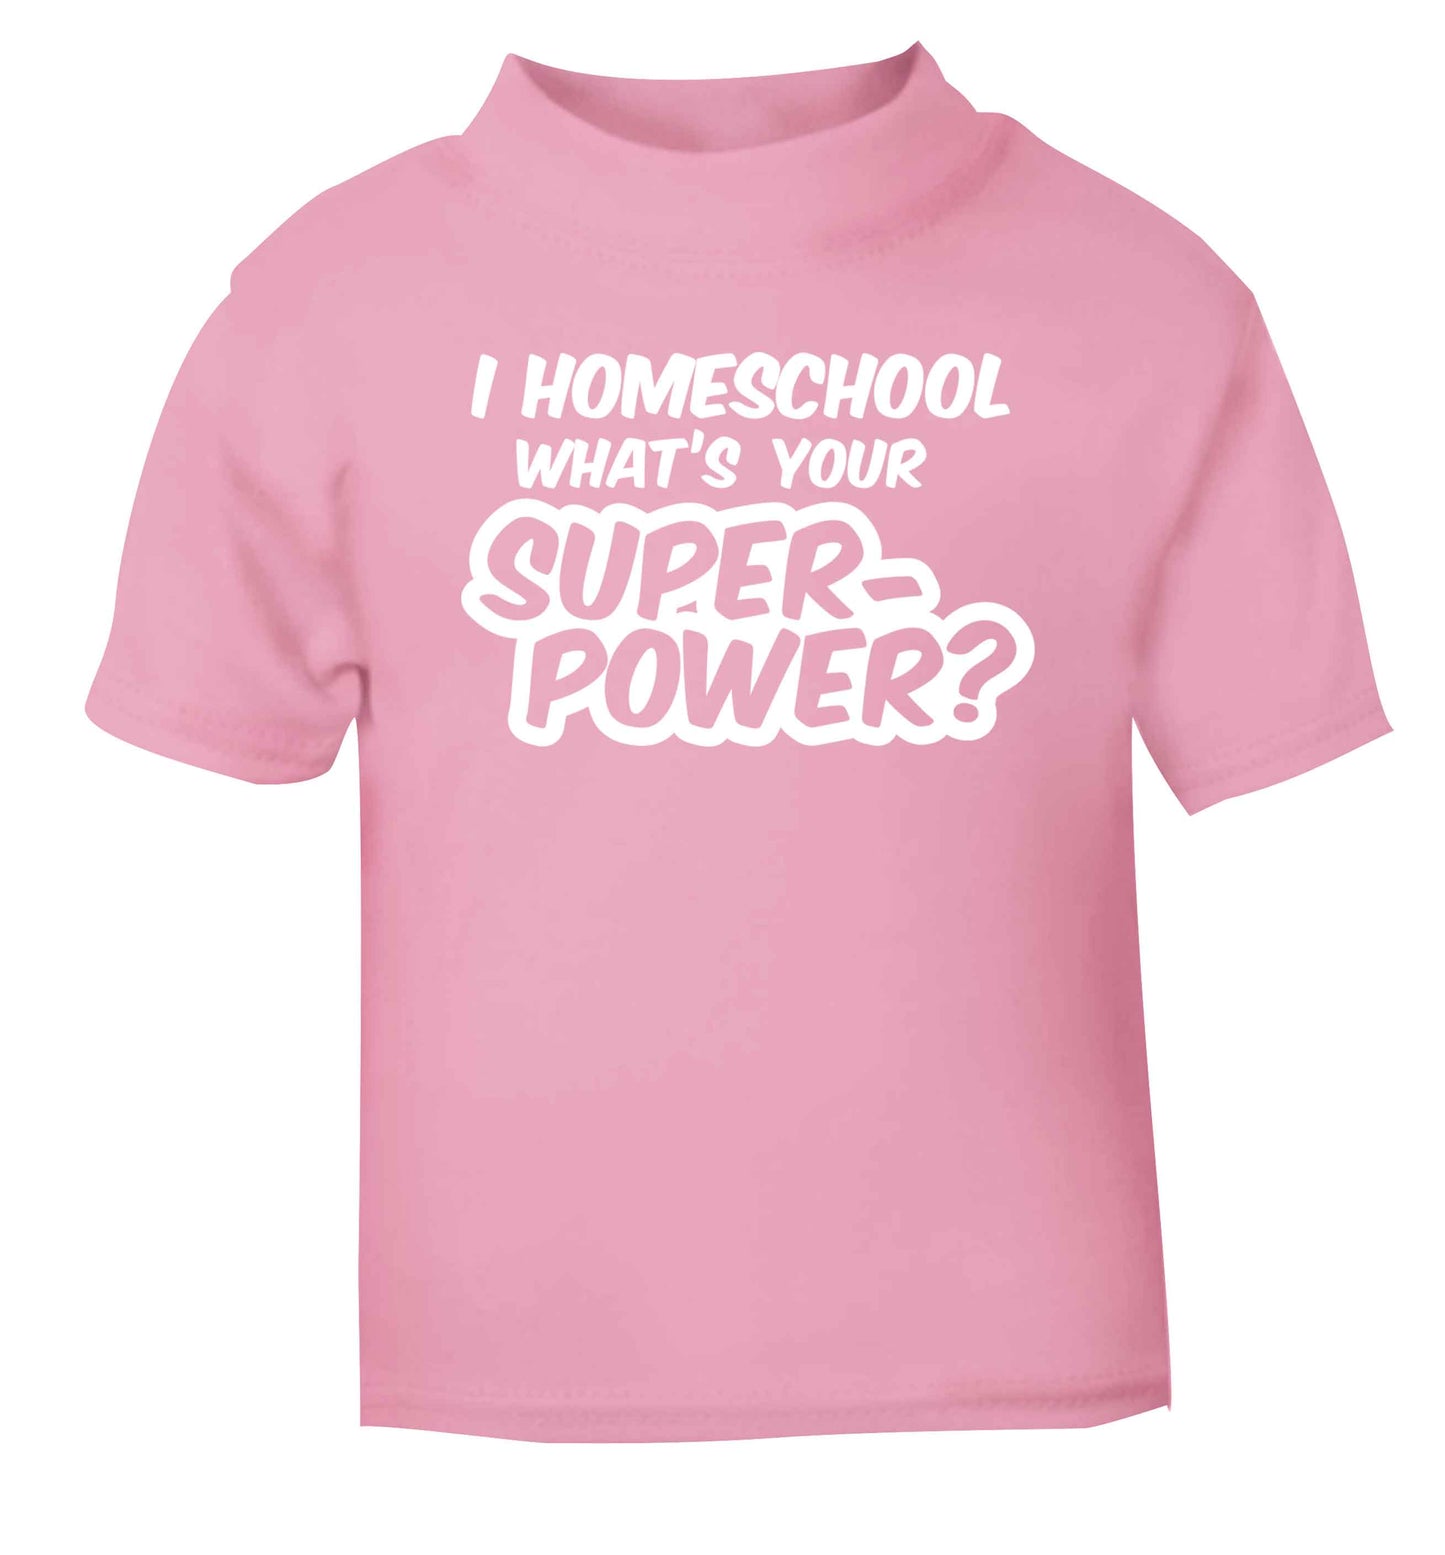 I homeschool what's your superpower? light pink Baby Toddler Tshirt 2 Years